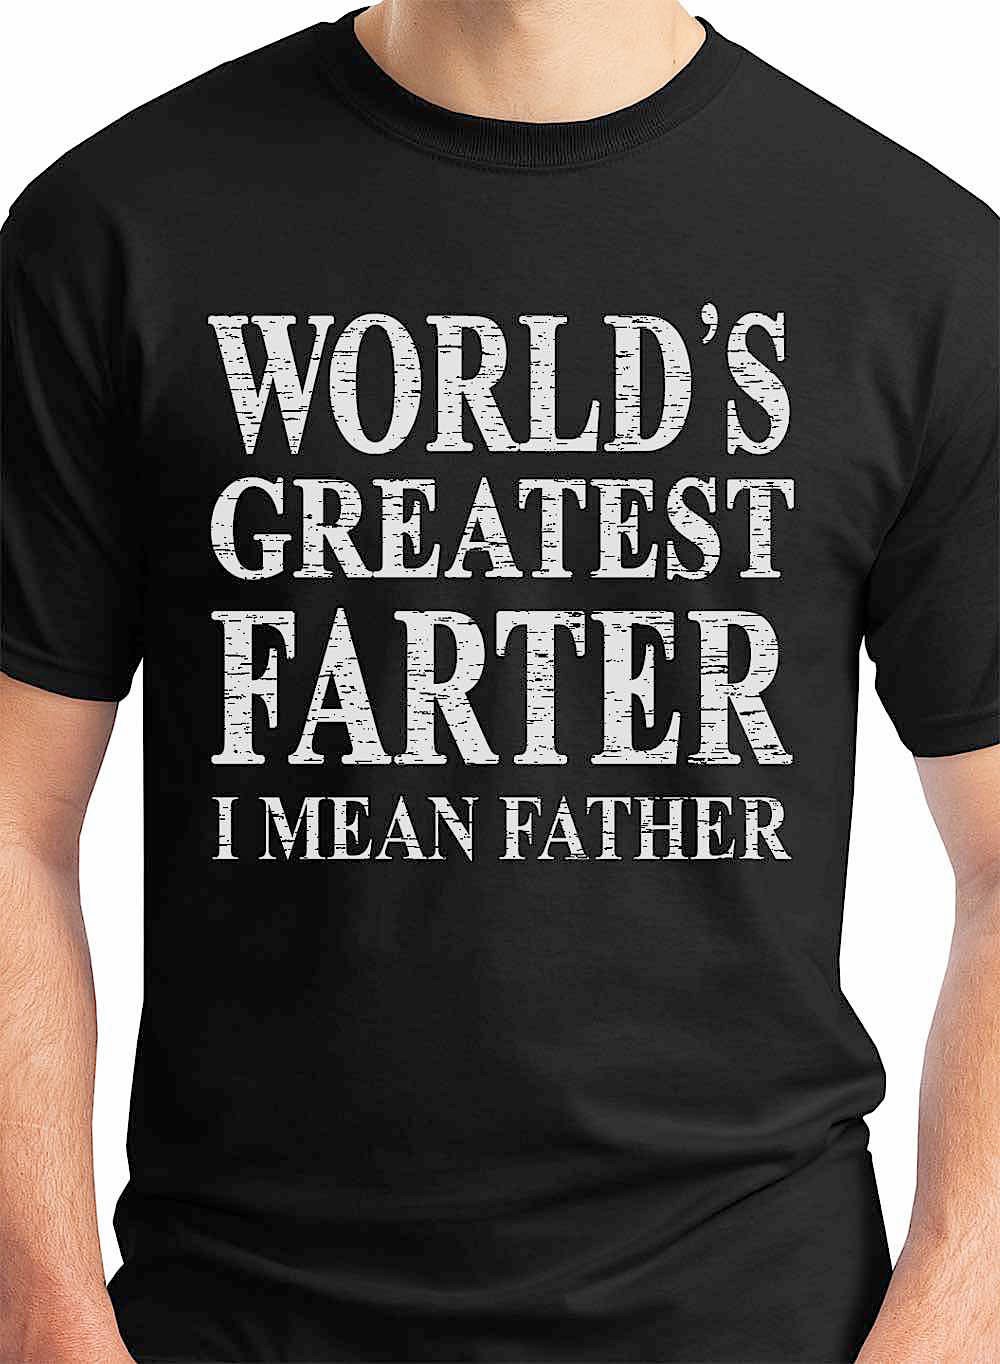 World's Greatest Farter I Mean Father T Shirt. Funny